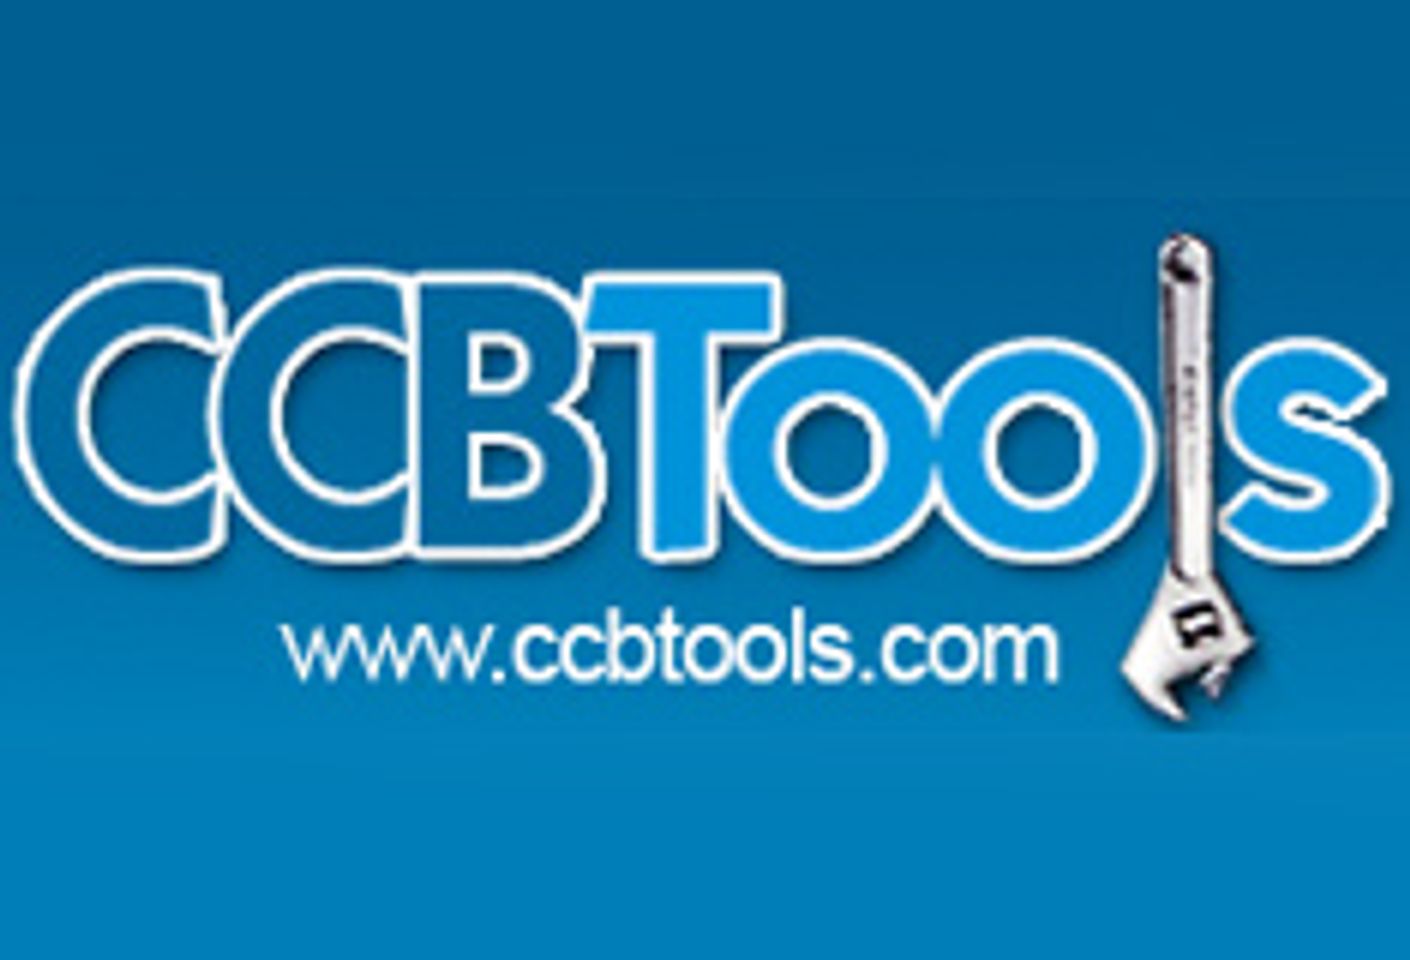 CCBTools Launches FLV Exporter with FLV XML Feed